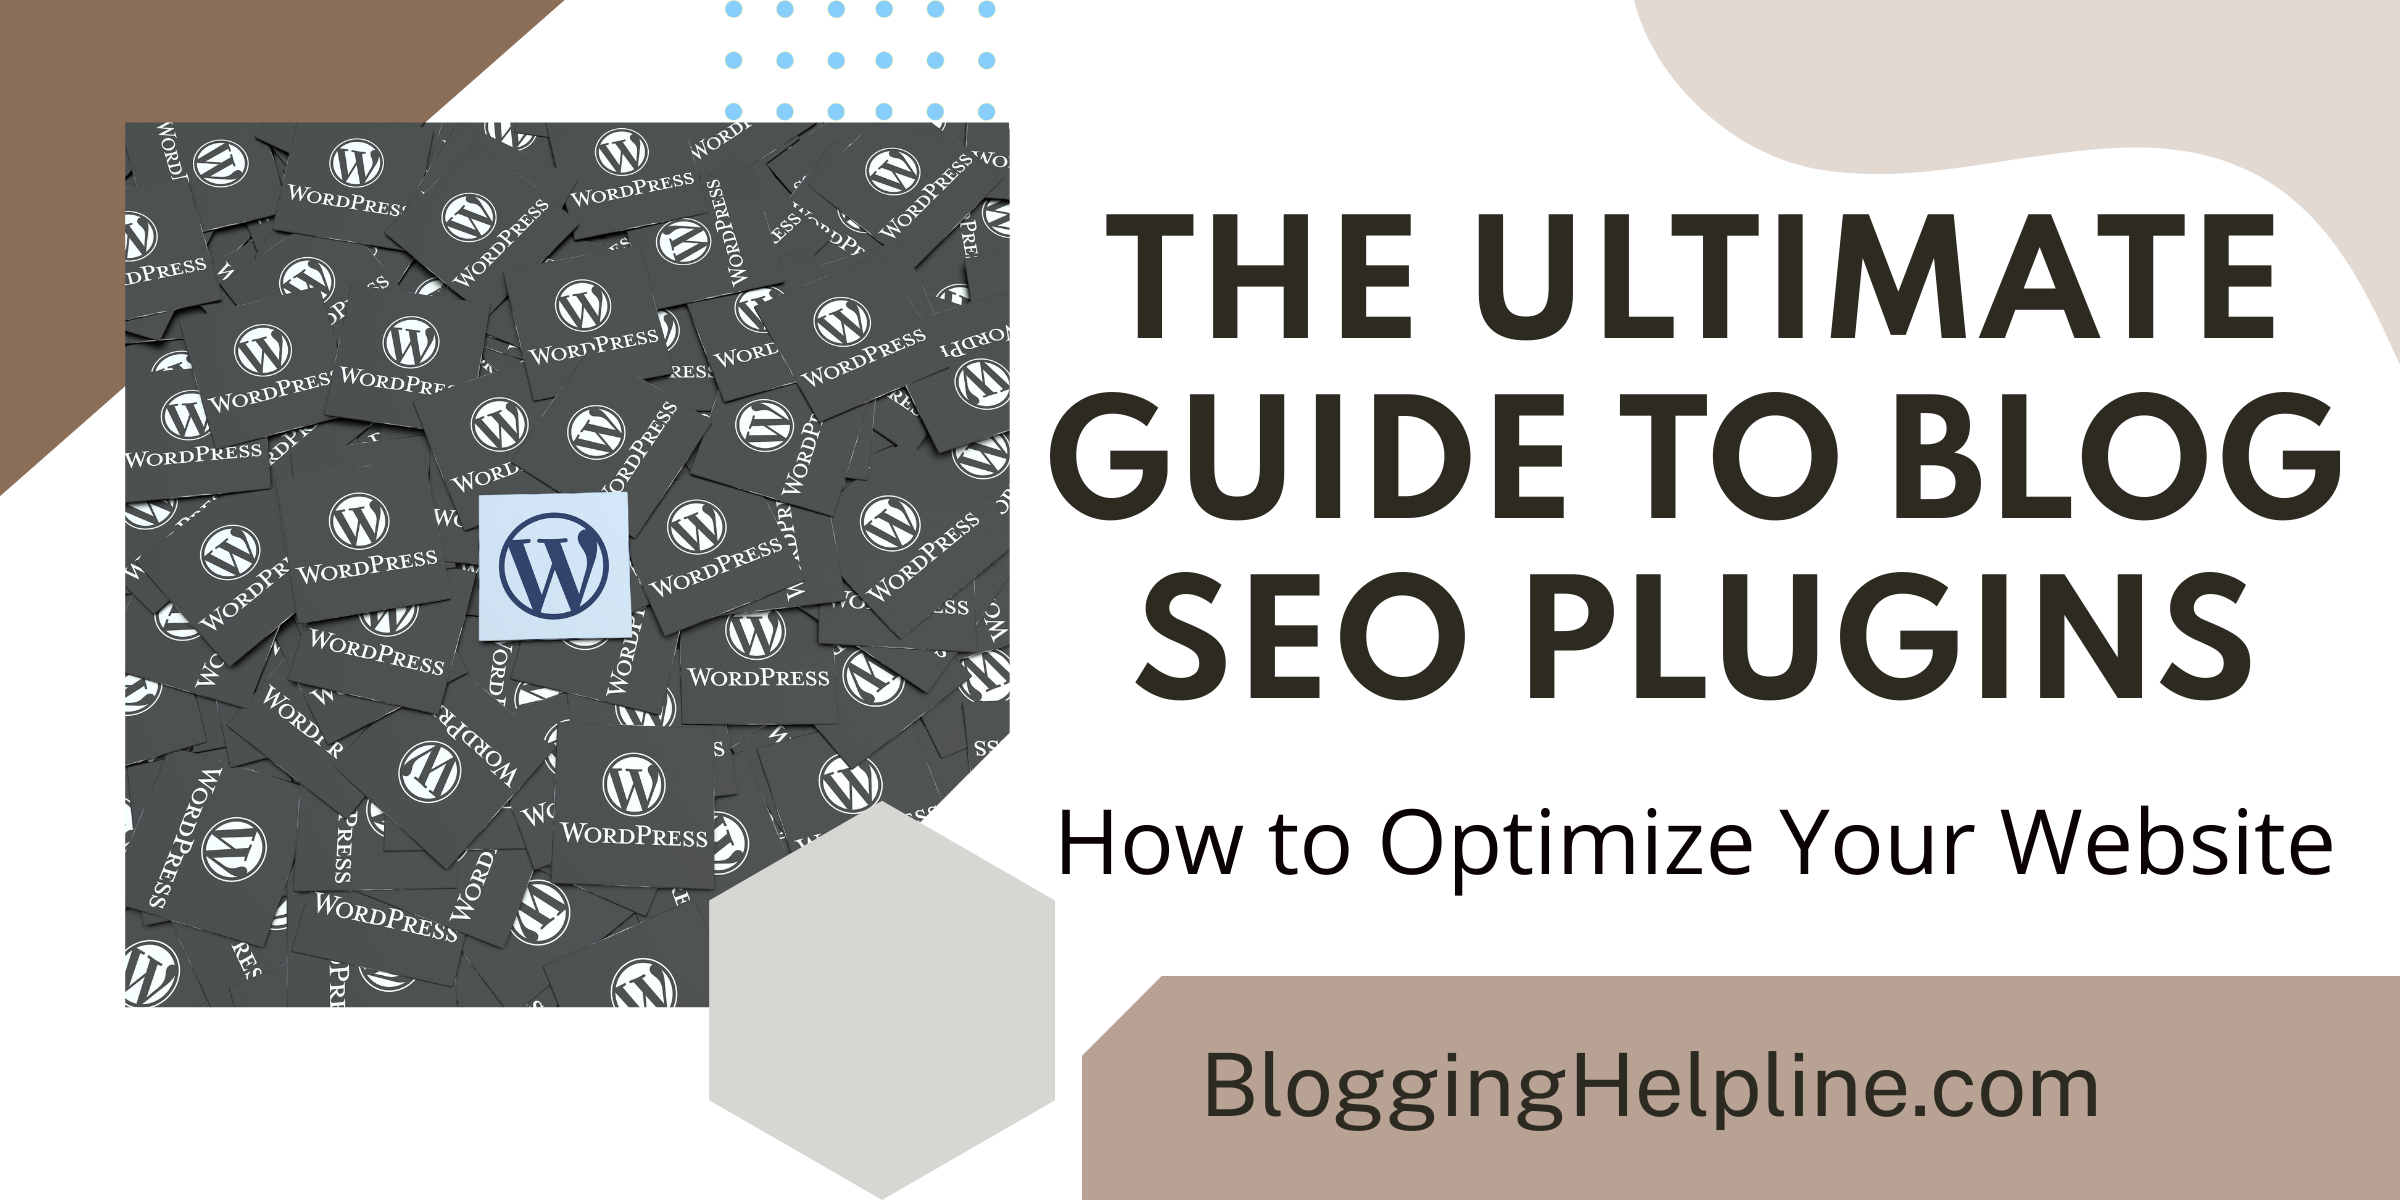 The Ultimate Guide to Blog SEO Plugins